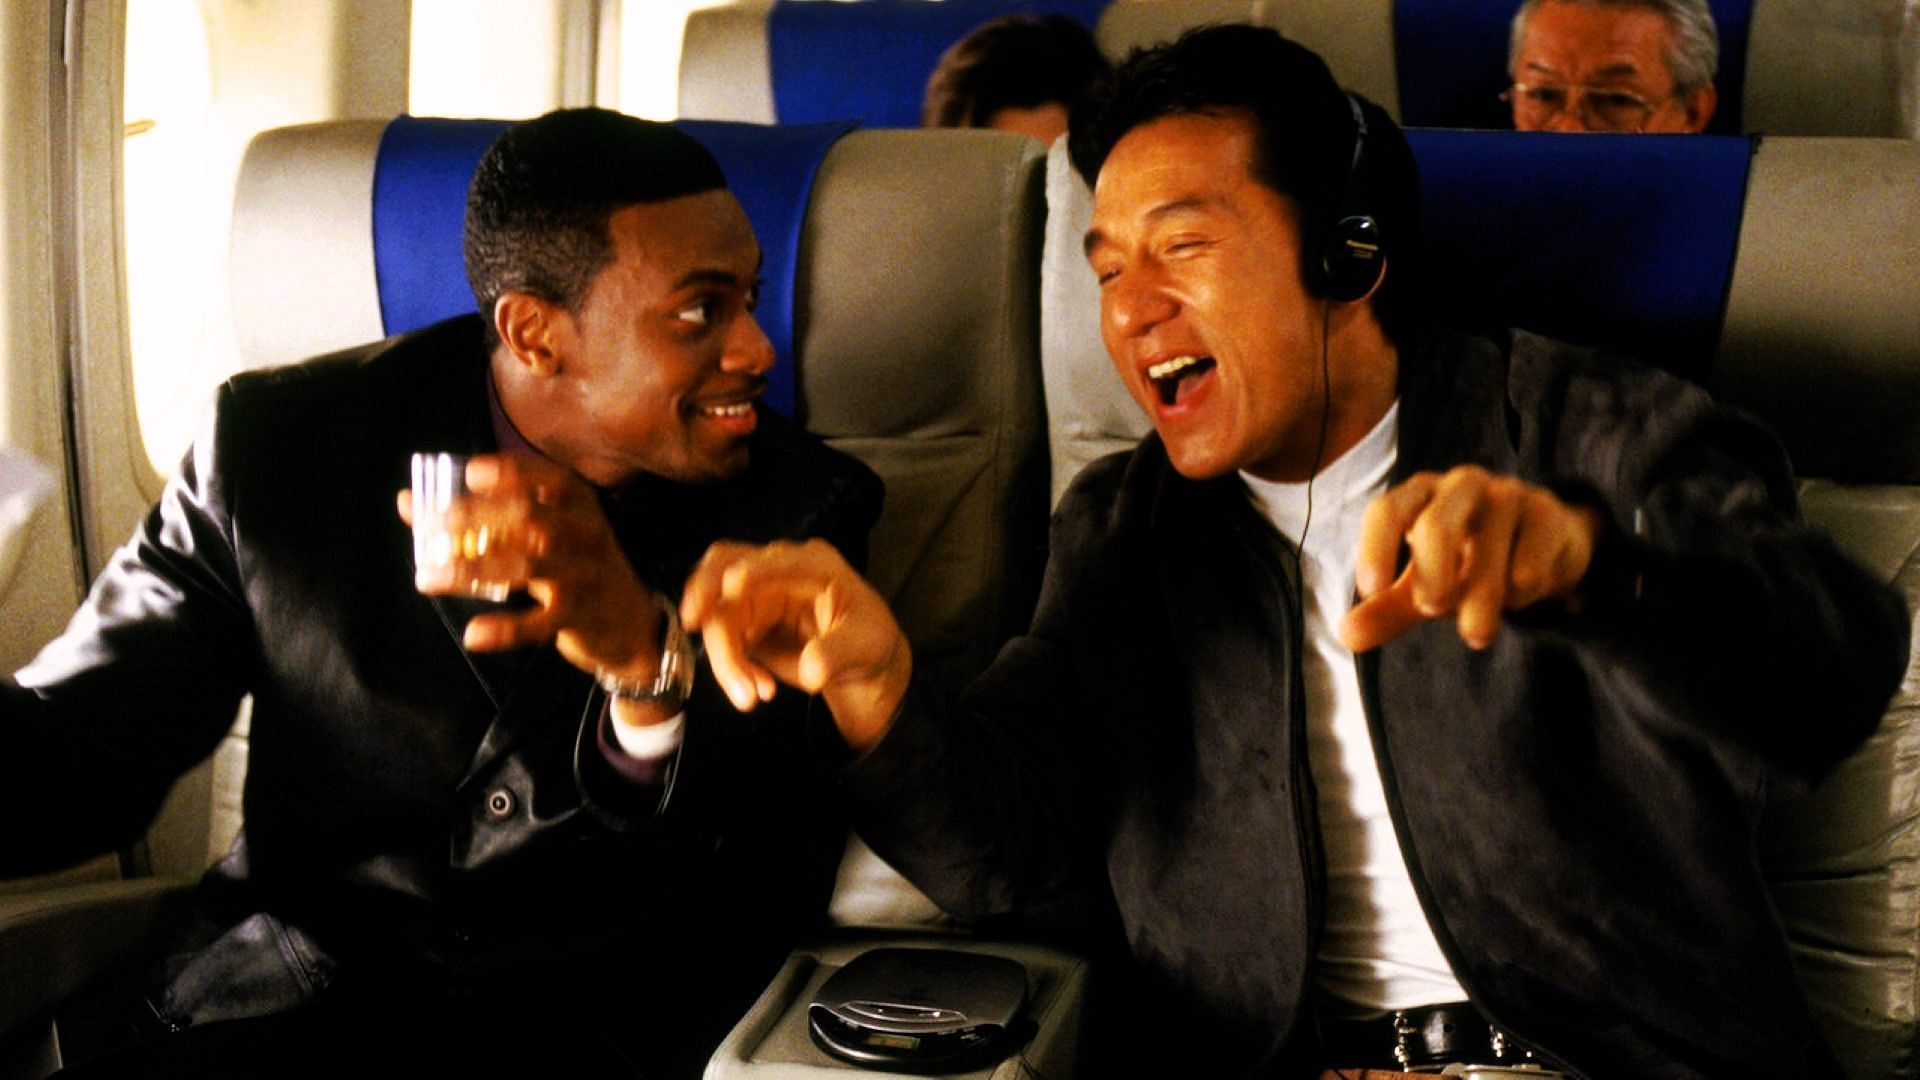 Fans think a fourth installment of Rush Hour is a must (Image via Netflix)